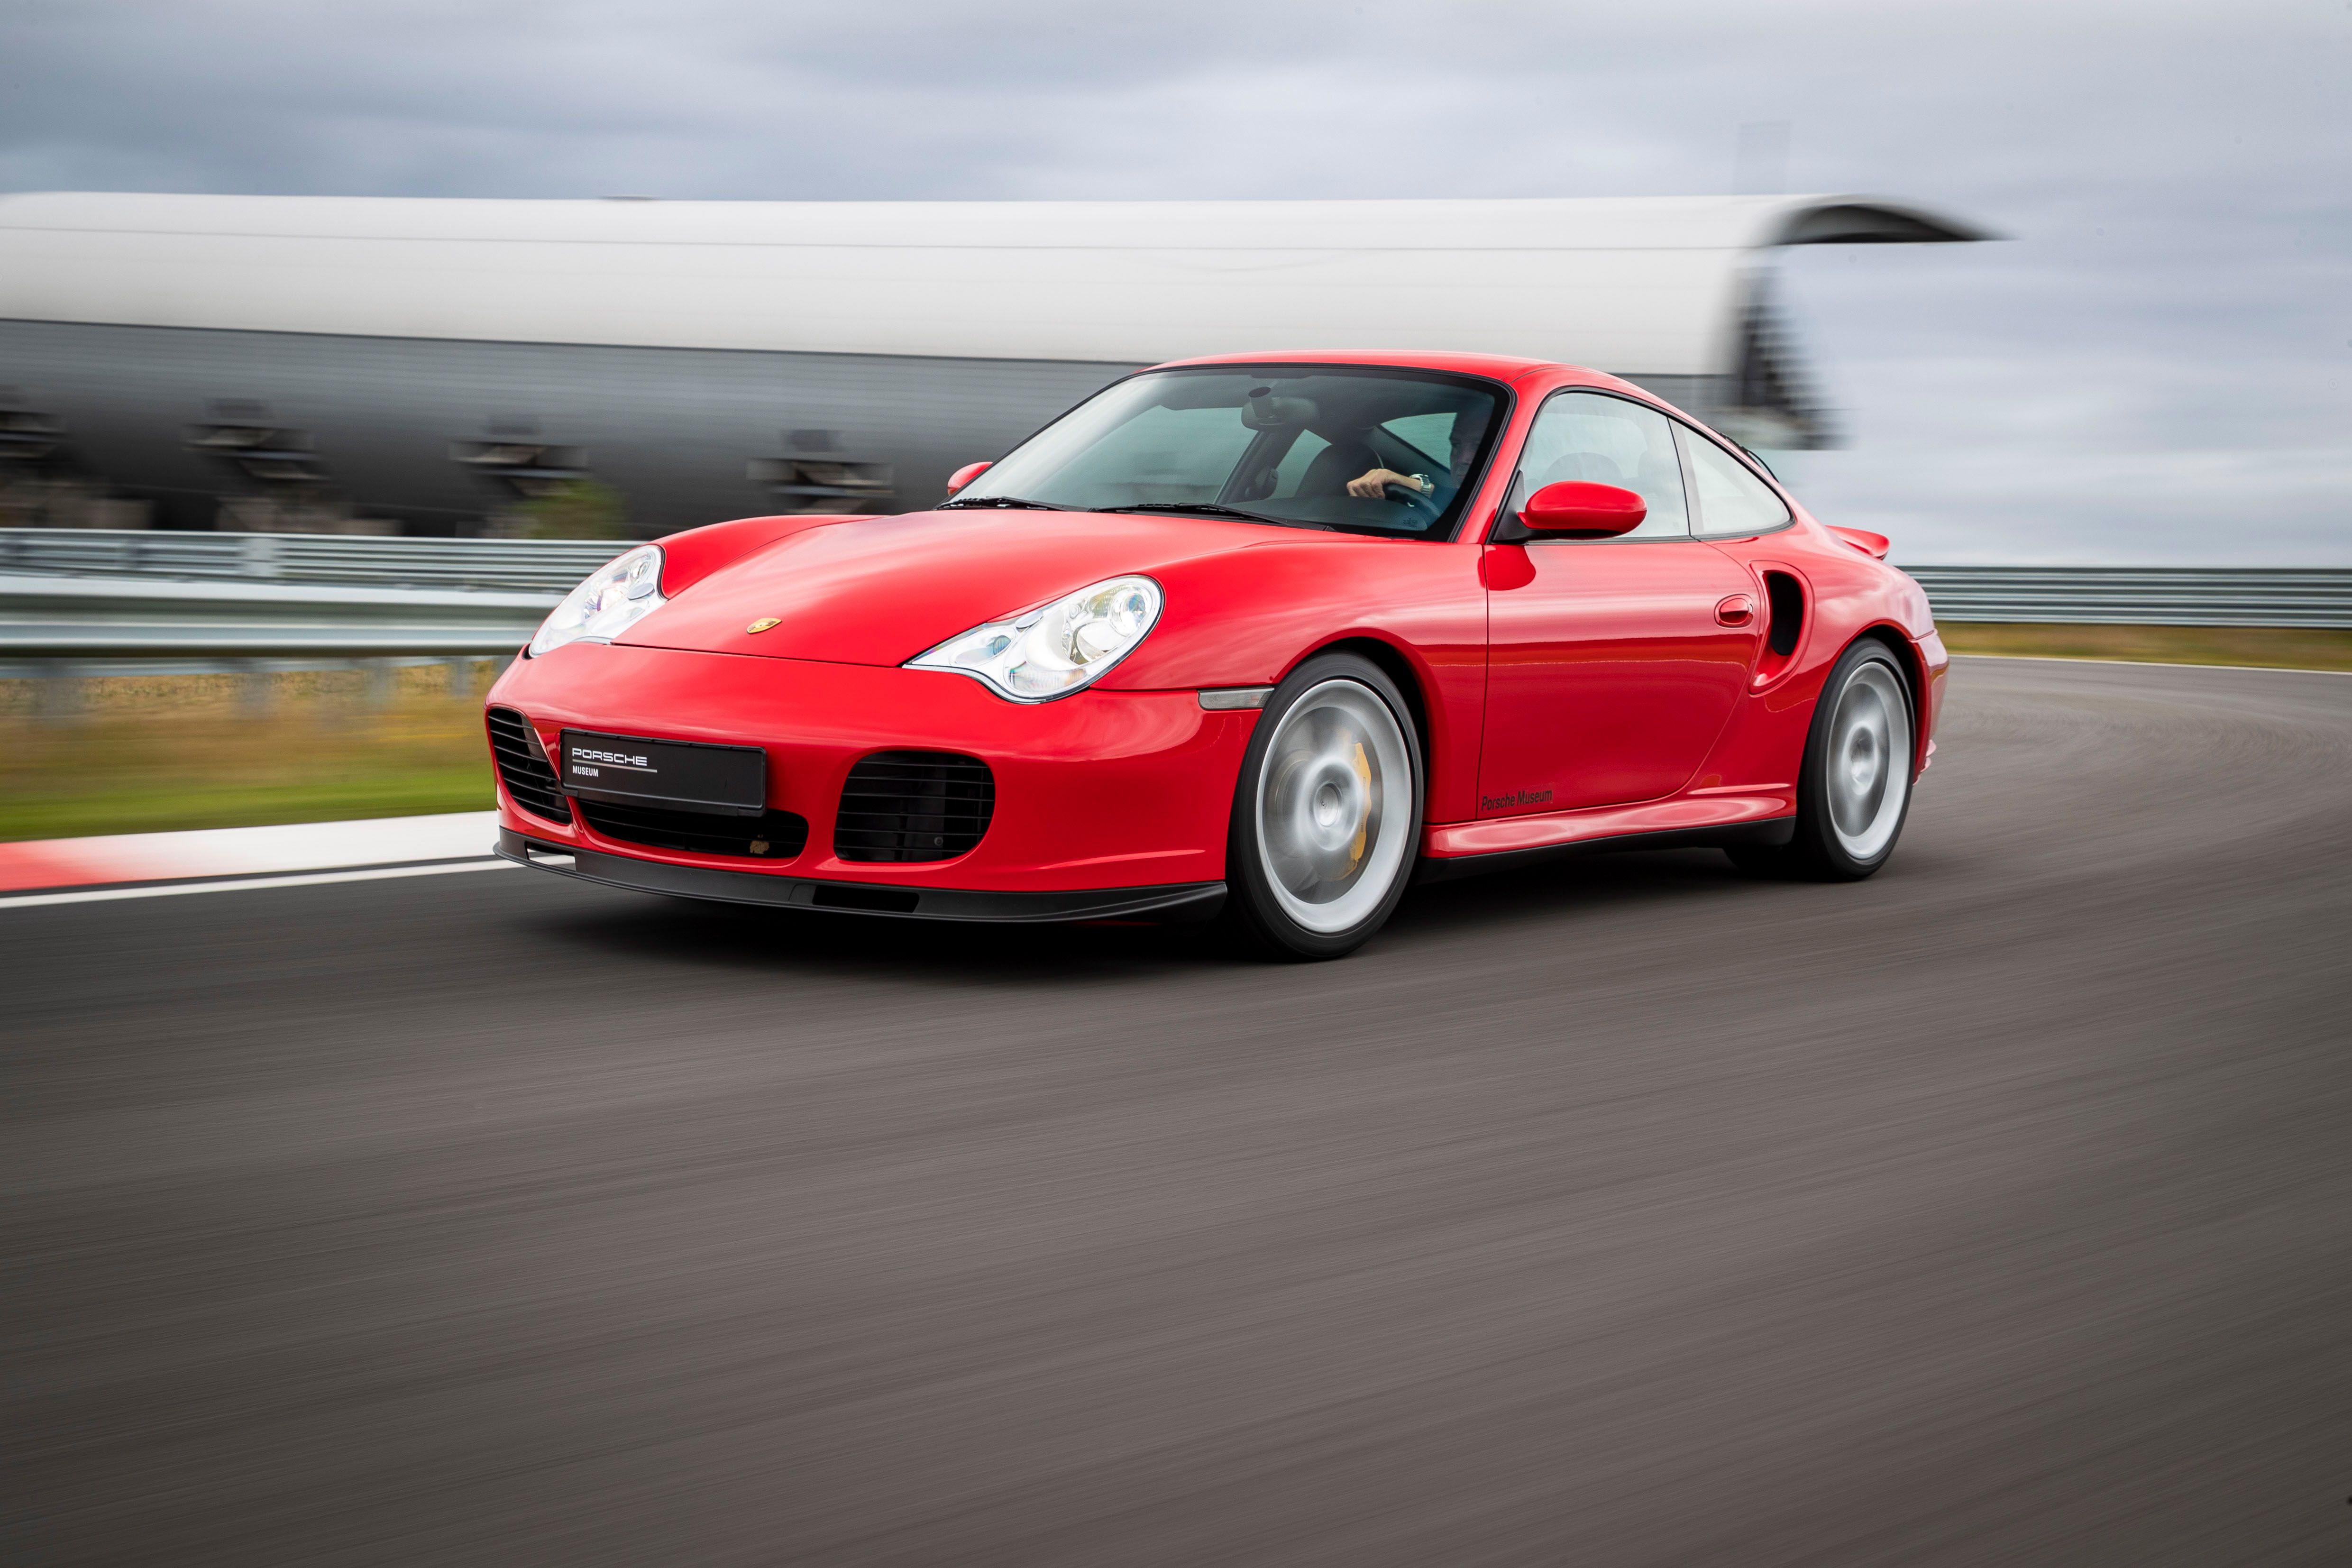 A red 911 Turbo on track.